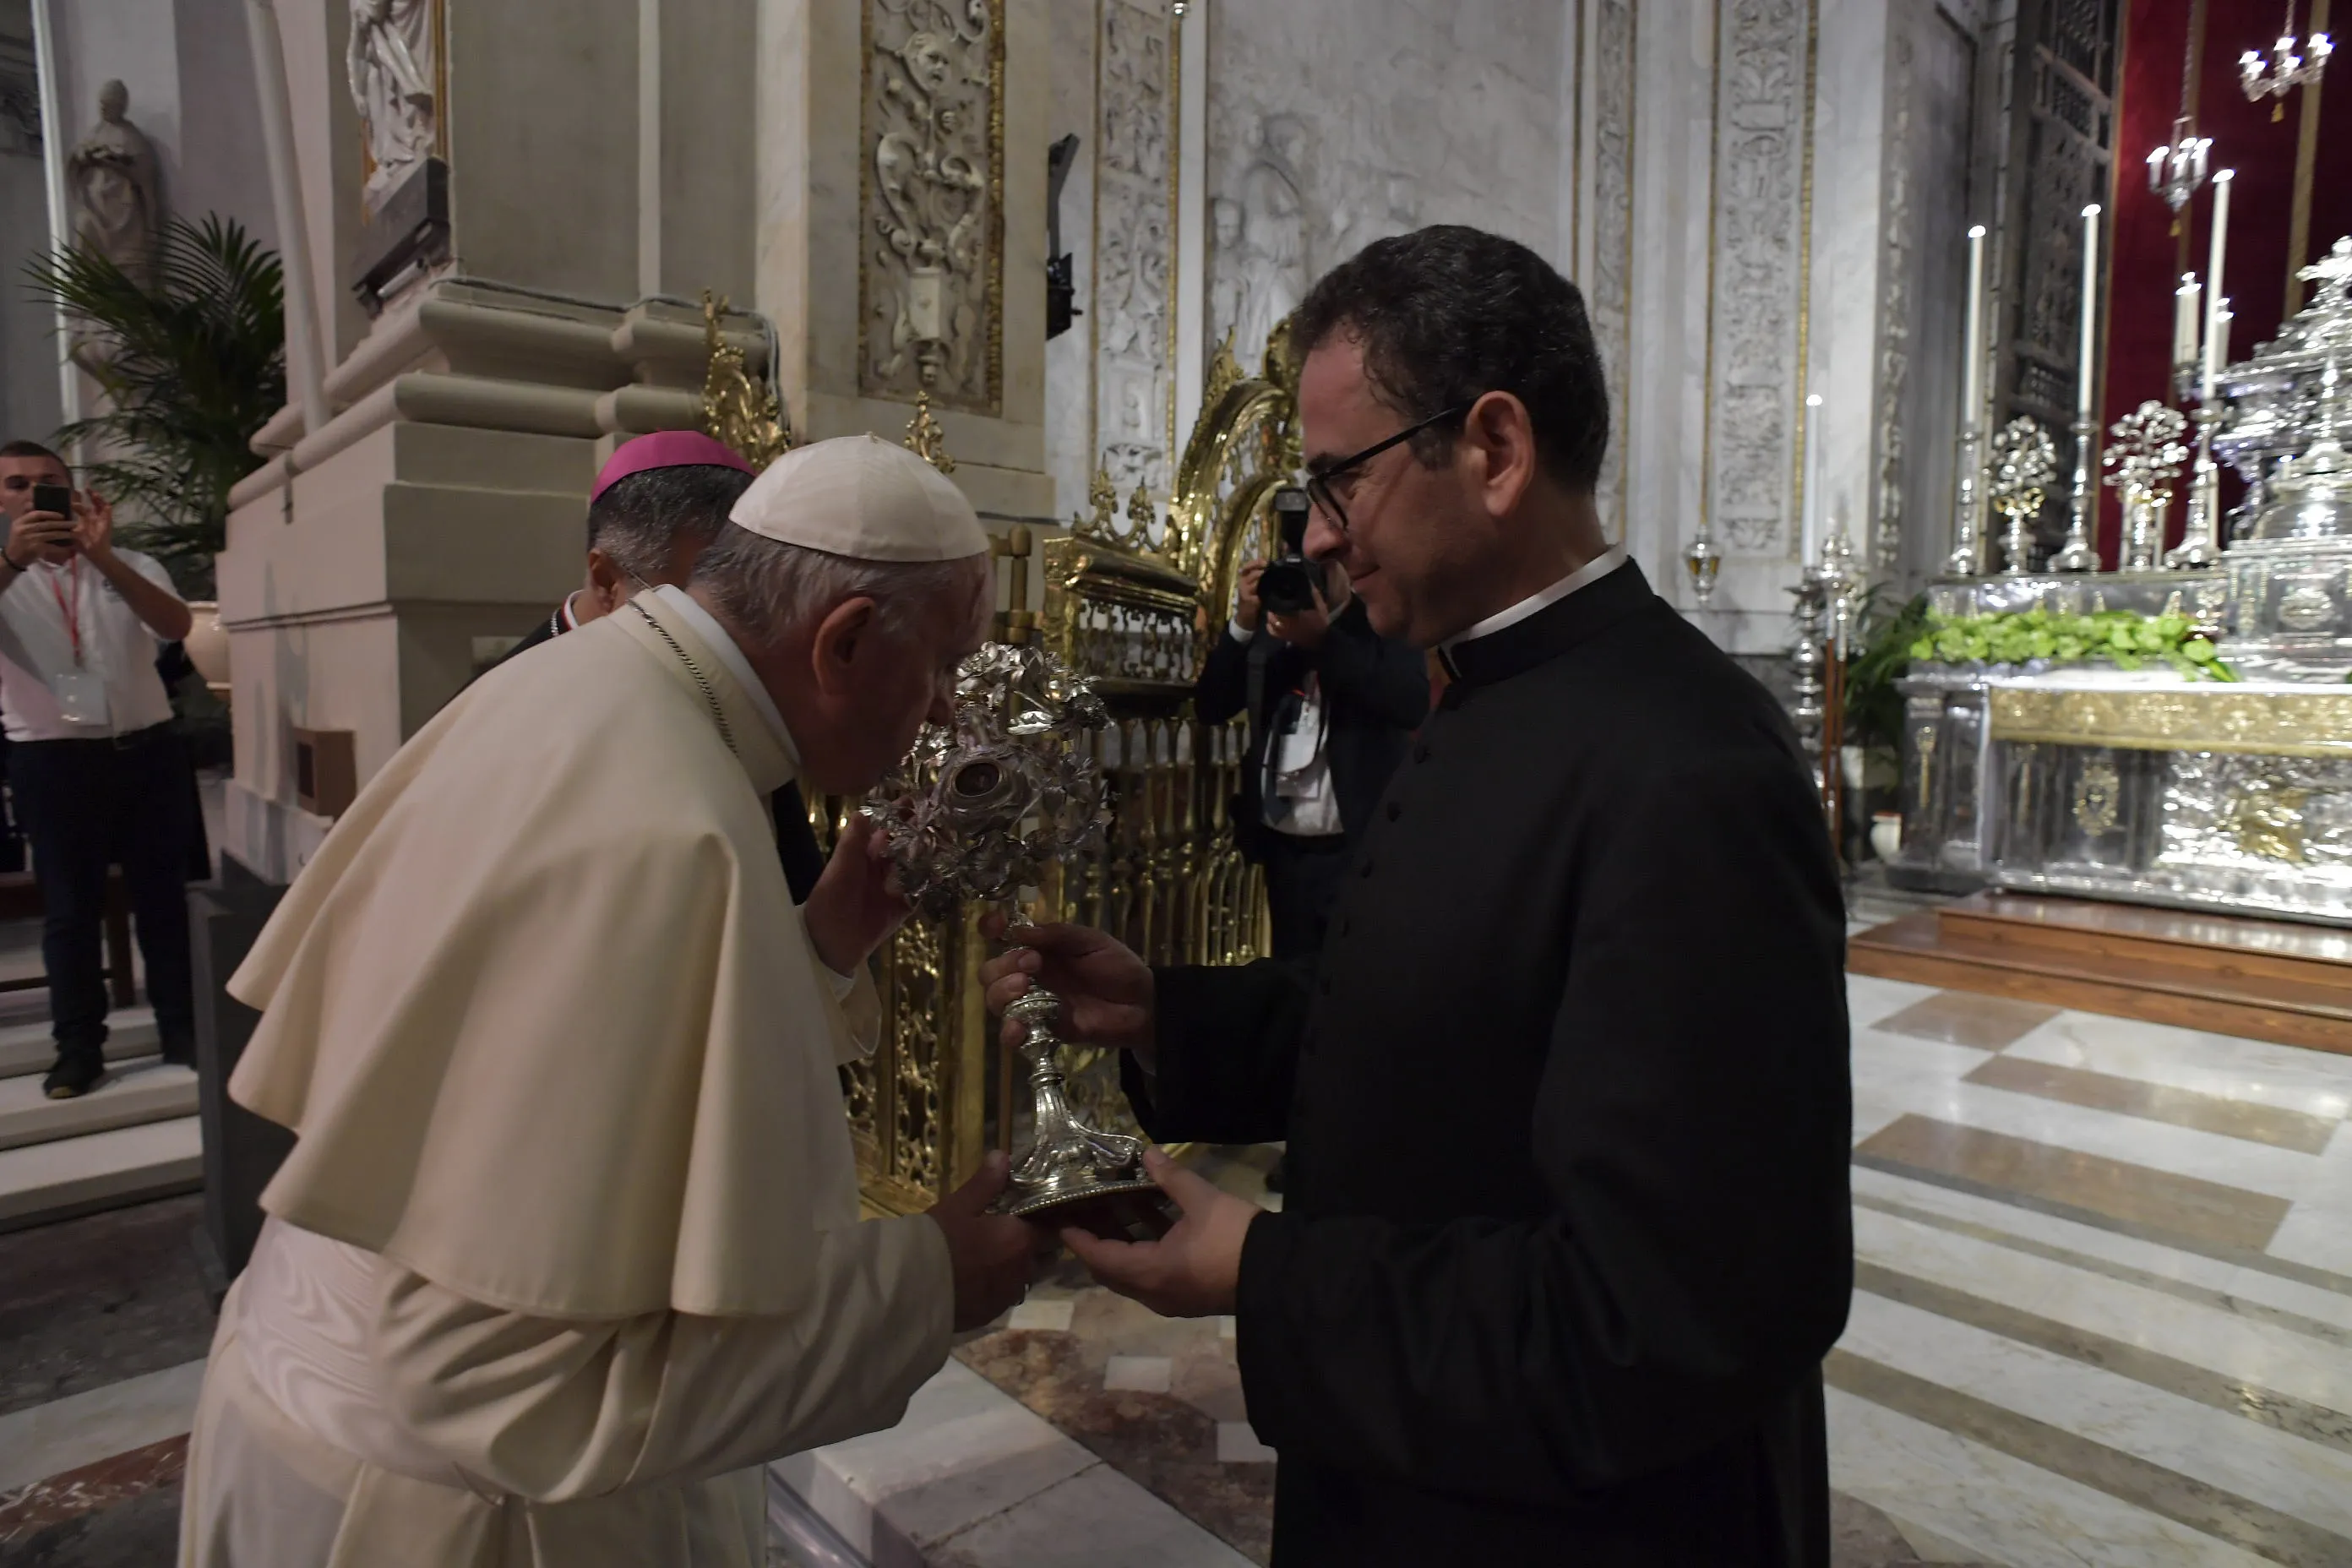 Pope Francis venerates a relic of Blessed Giuseppe "Don Pino" Puglisi in the Cathedral of Palermo, during a one-day visit to the Archdiocese of Palermo on the Italian island region of Sicily on Sept. 15, 2018. Vatican Media.